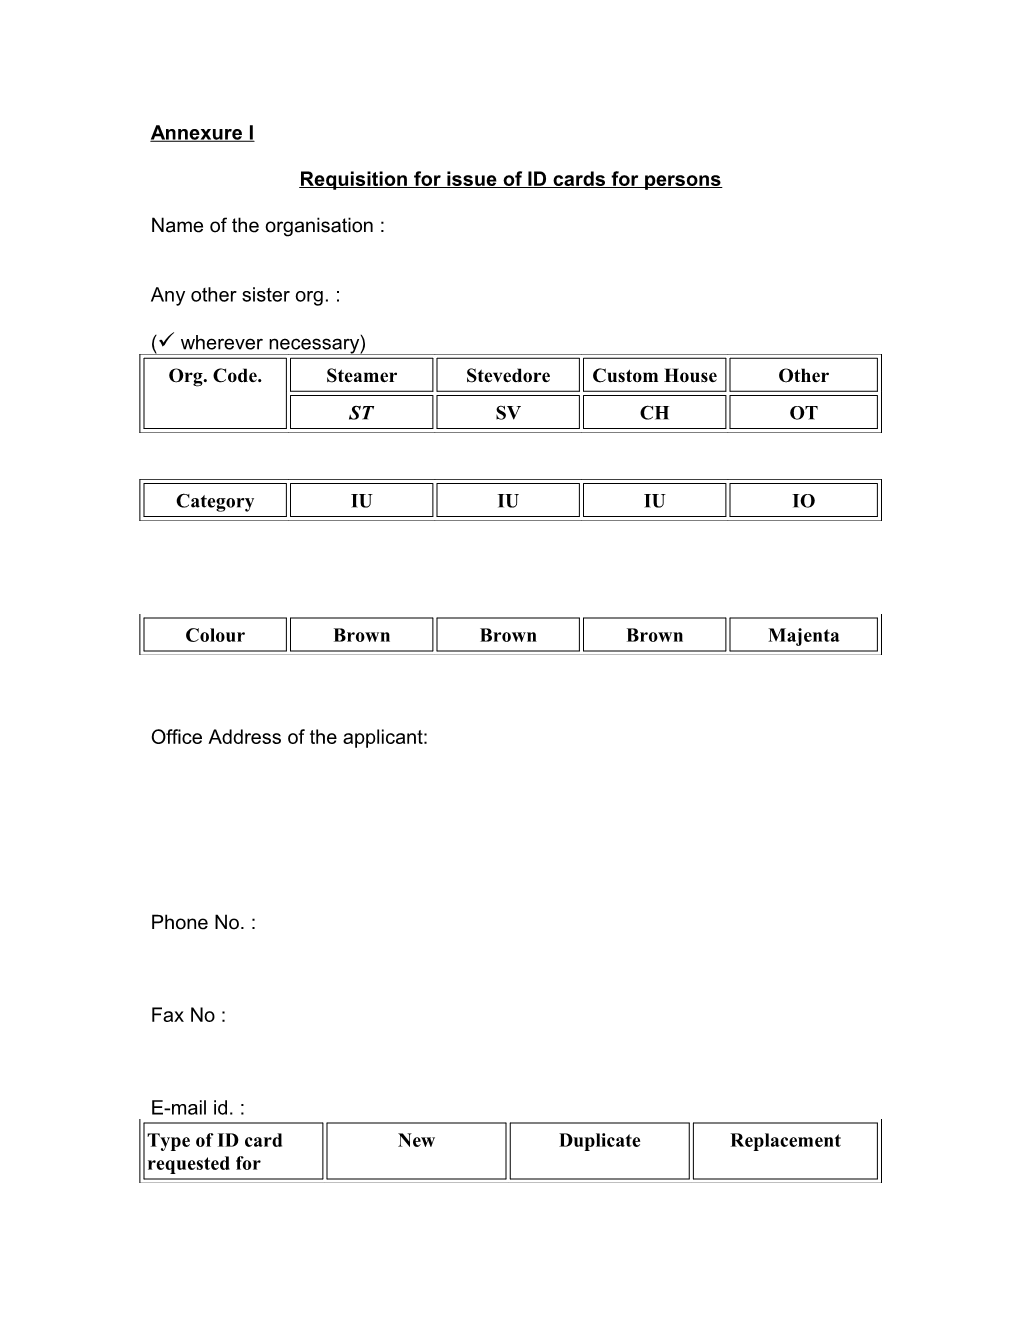 Requisition for Issue of ID Cards for Persons